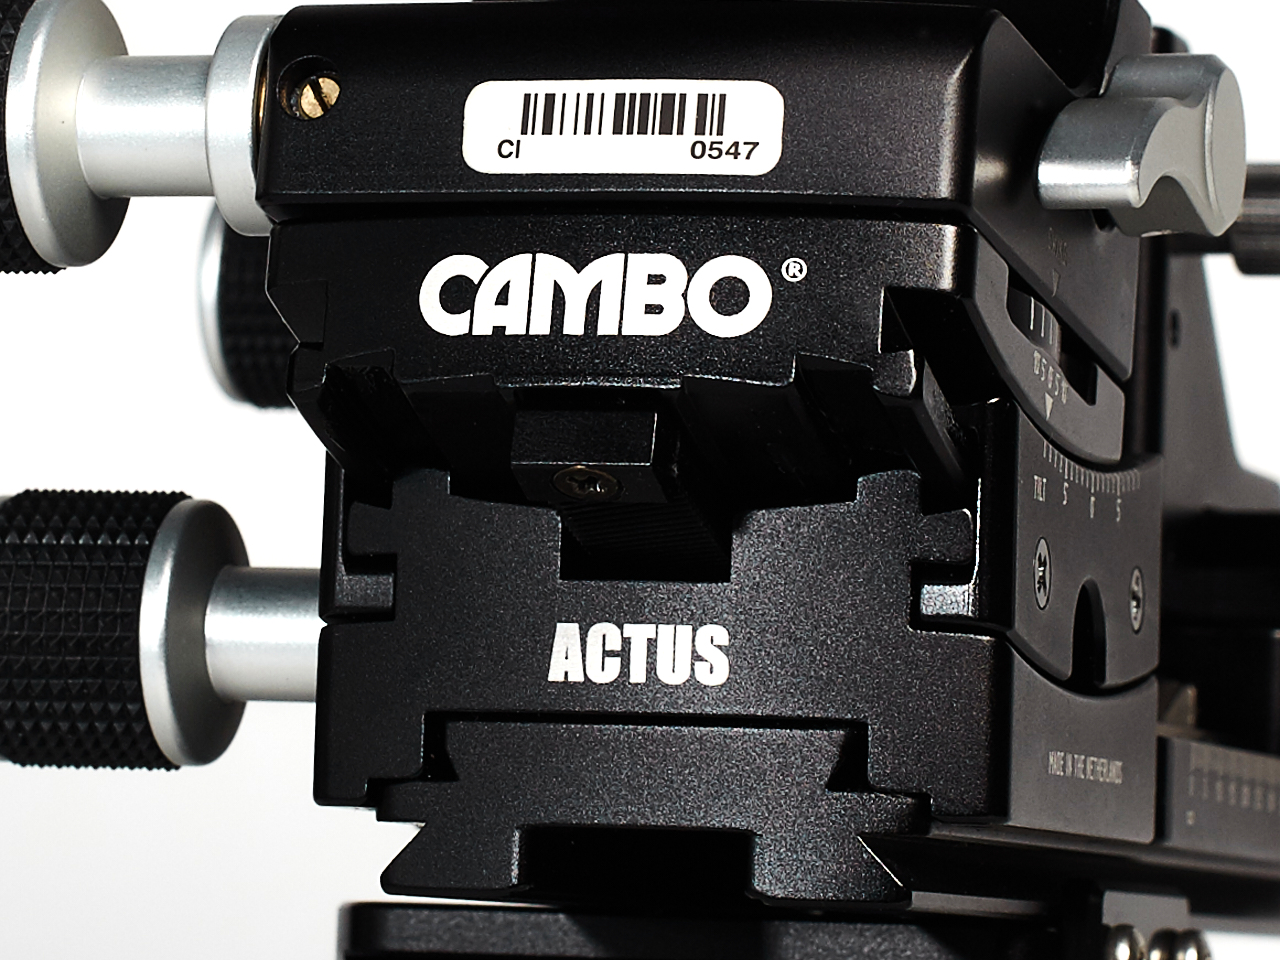 Cambo Actus - first look